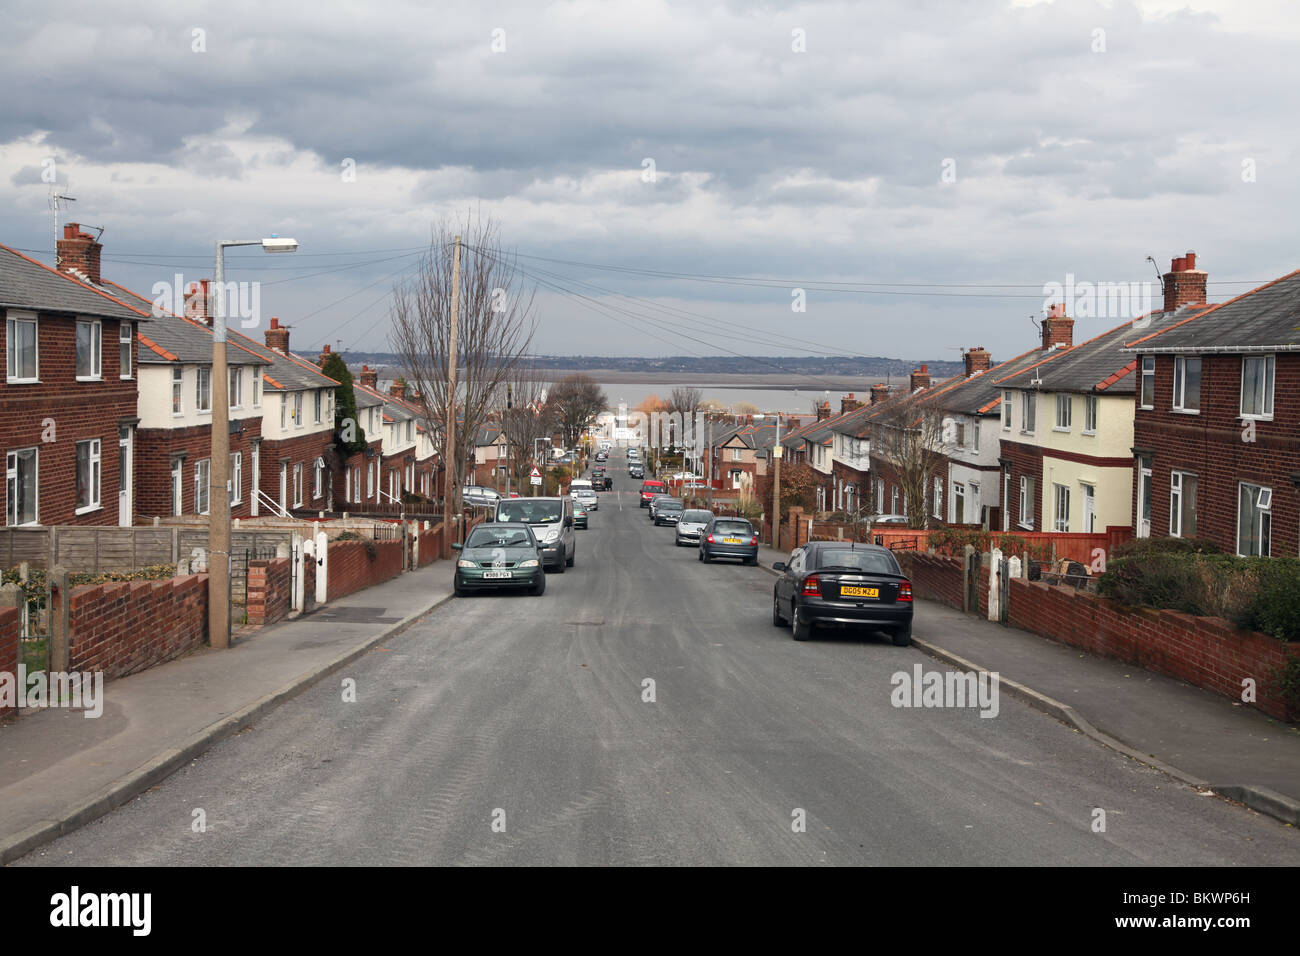 Council housing estate overlooking Dee Estuary in Flint, north Wales to Wirral in distance Stock Photo